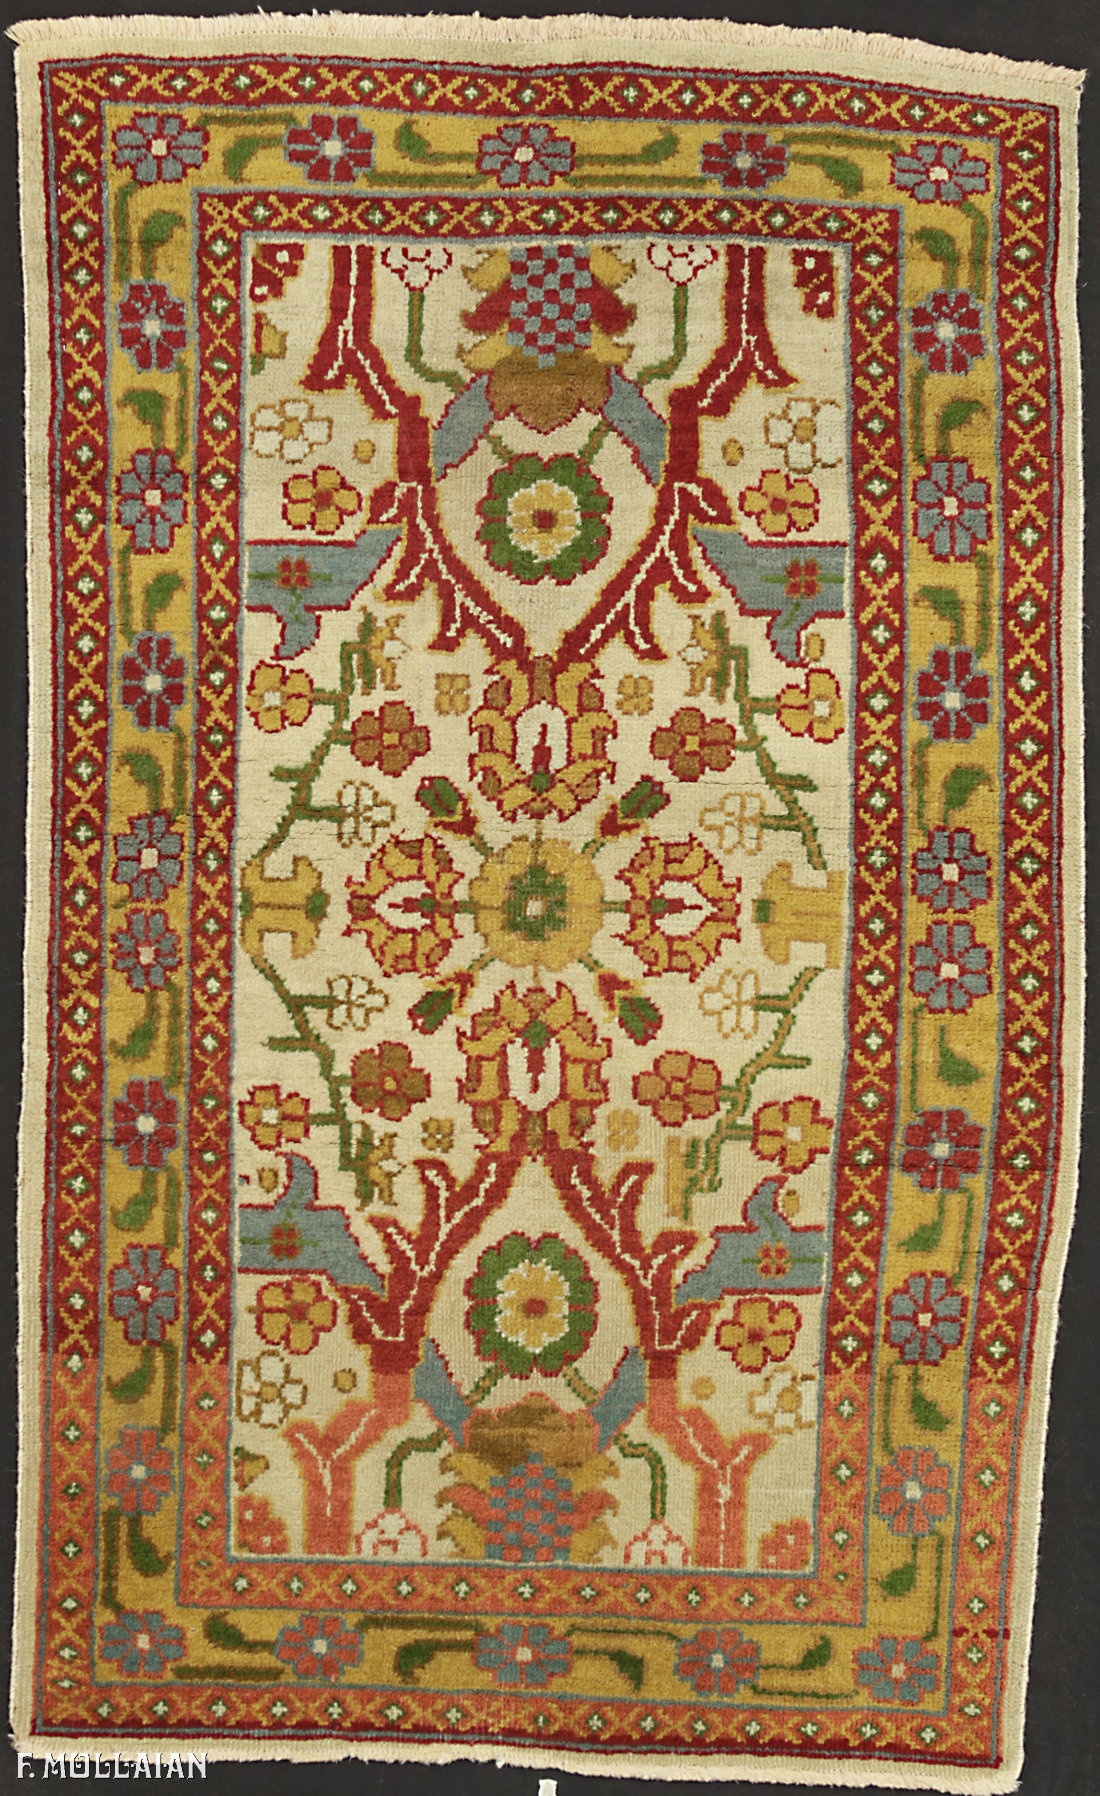 Antique Indian Small Agra Rug n°:97455747